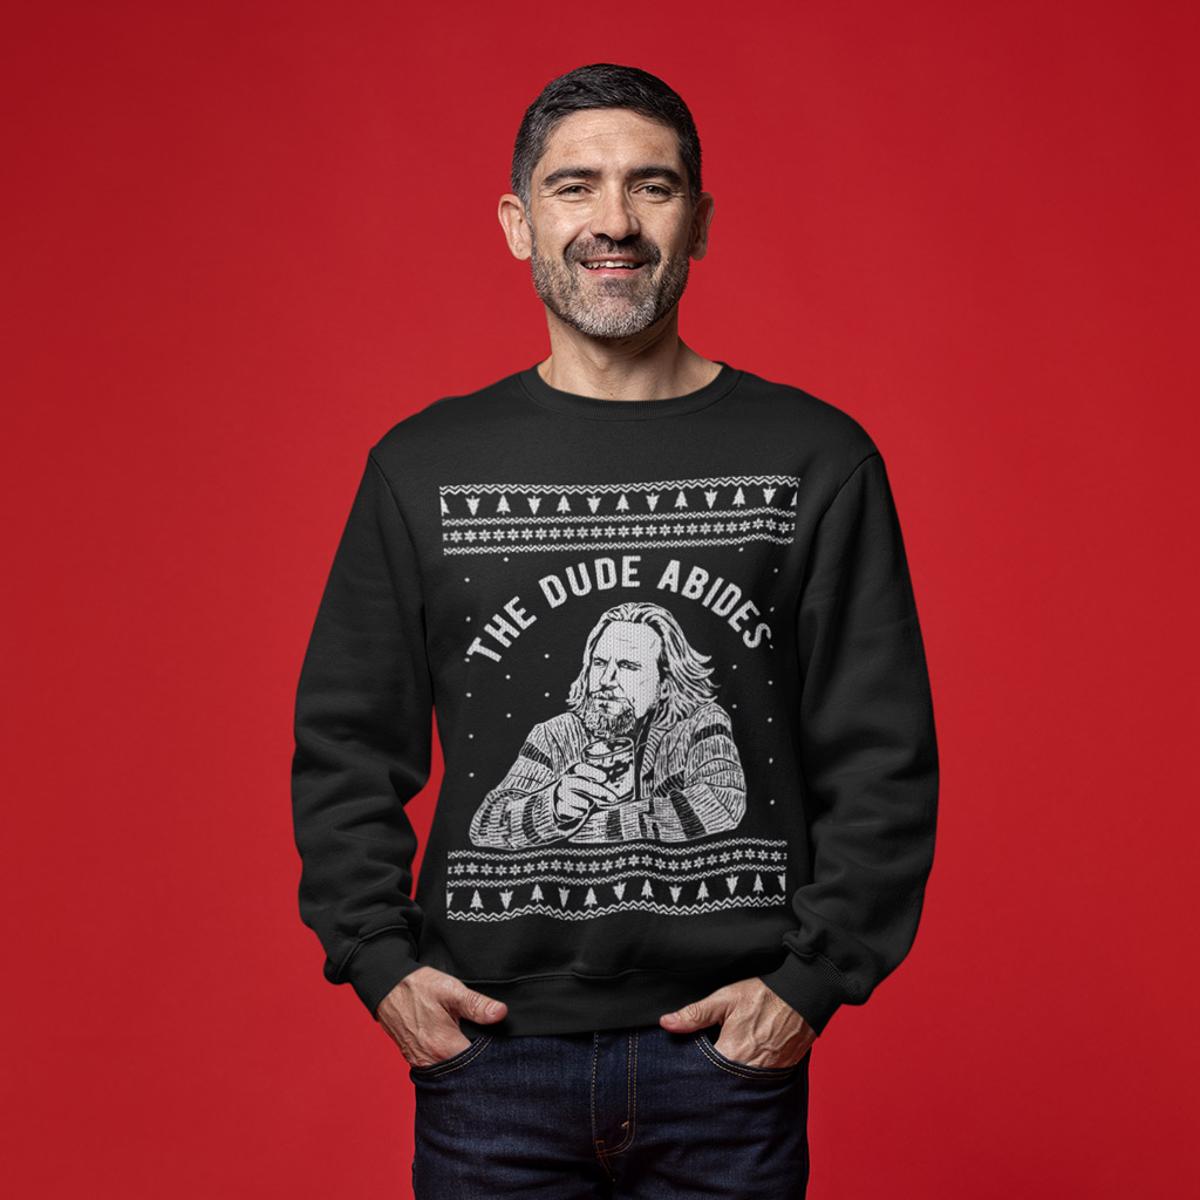 The Dude Abides The Big Lebowski Ugliest Sweaters For Christmas